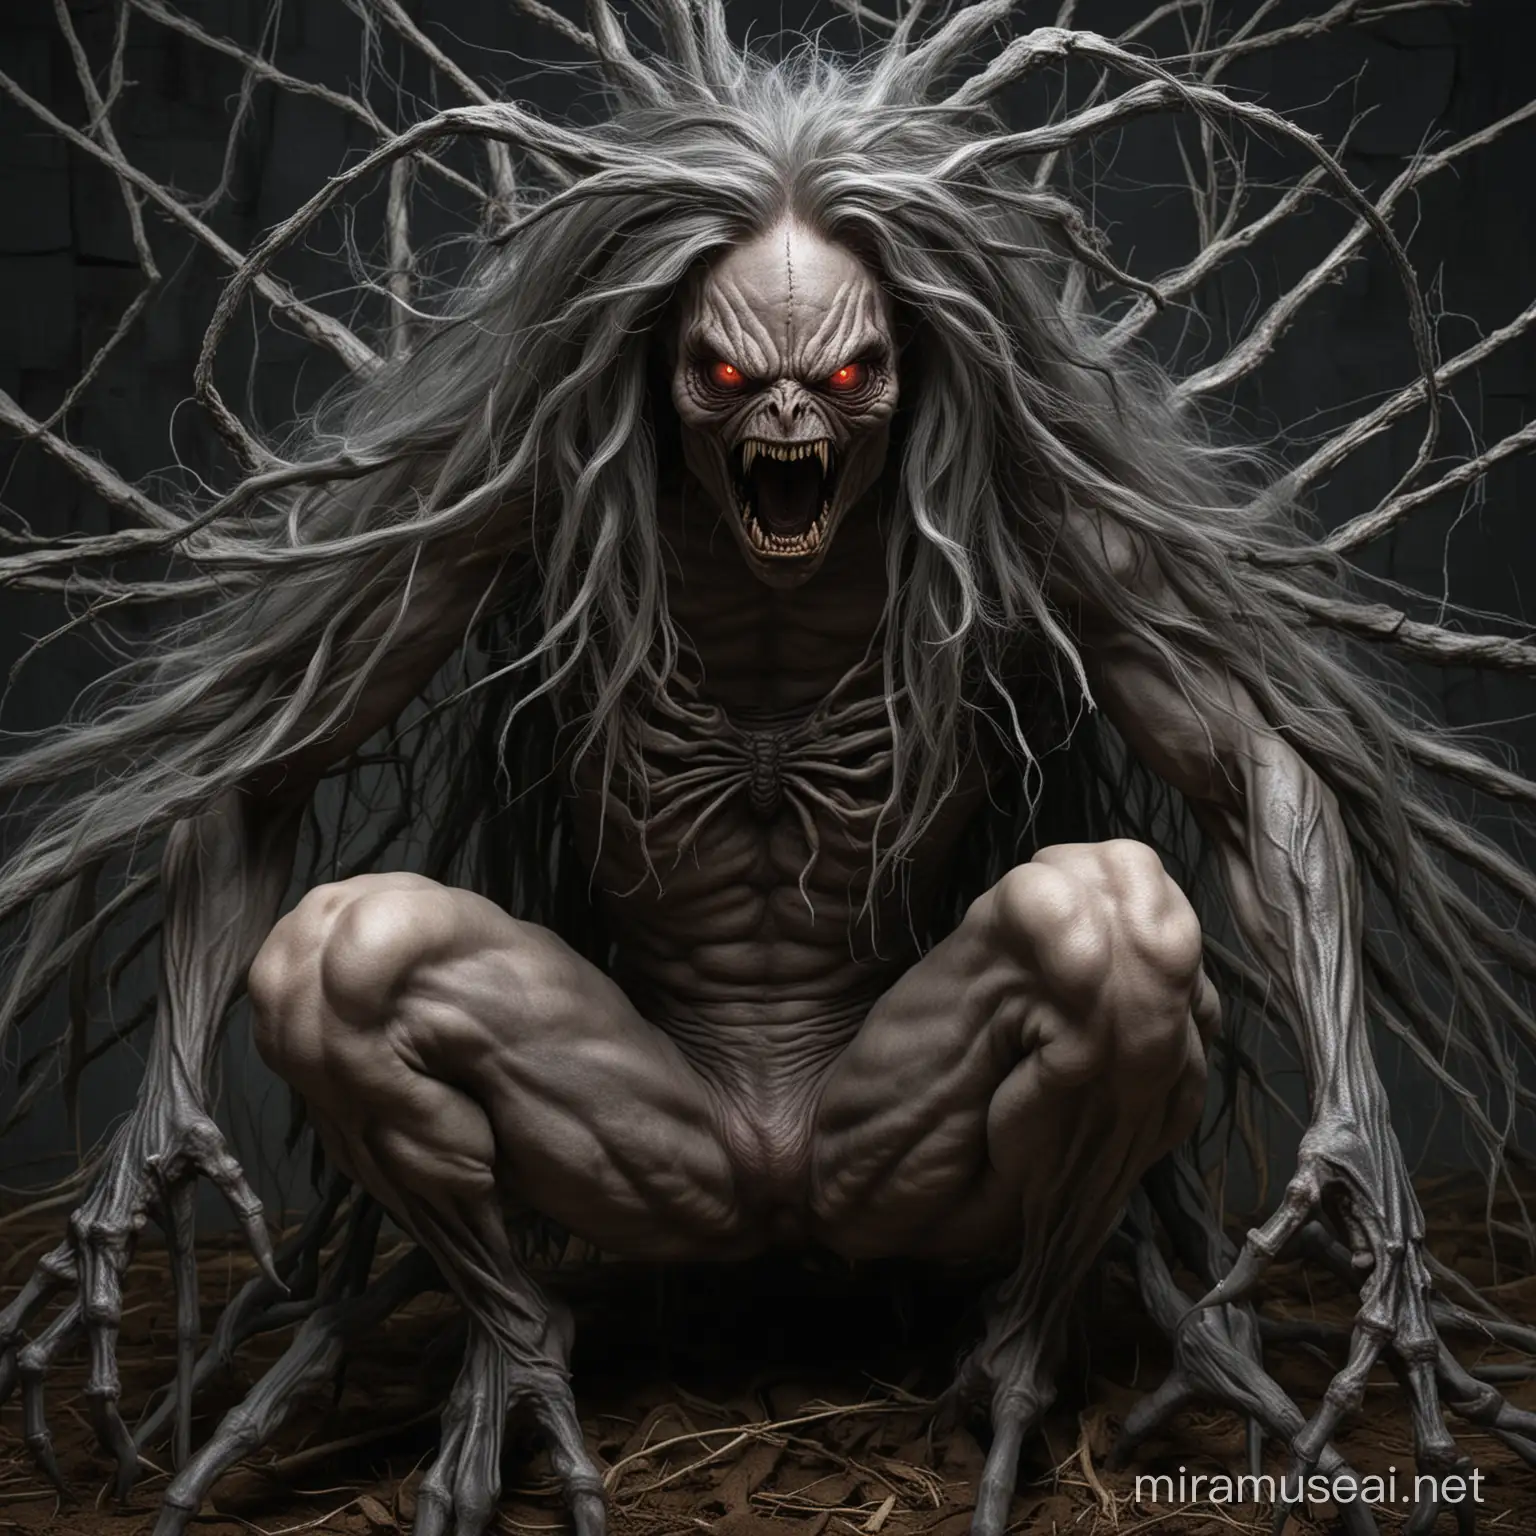 sinister and terrifying figure, combining the features of both human and spider in a grotesque fusion of flesh and chitin. From the waist up, he possesses the appearance of a grey human, with long flowing hair as dark as midnight and piercing crimson eyes that seem to glow with an otherworldly light. 

Lower part of his body that of a monstrous spider, with eight hairy legs that scuttle and skitter across the ground with unsettling agility. 